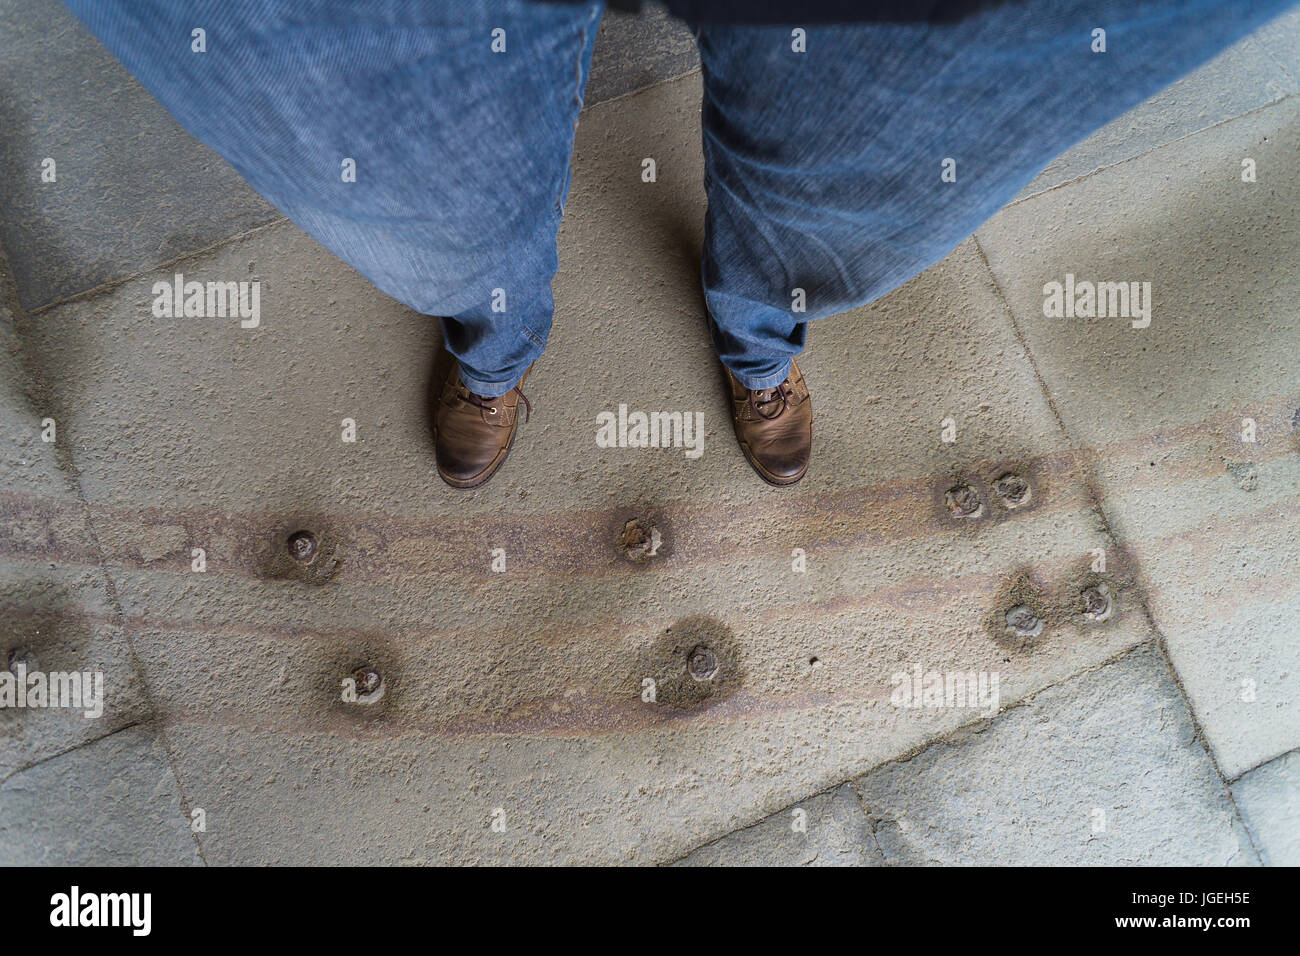 Man's legs and leather boots standing on empty ground with rusted rails embedded in stone Stock Photo